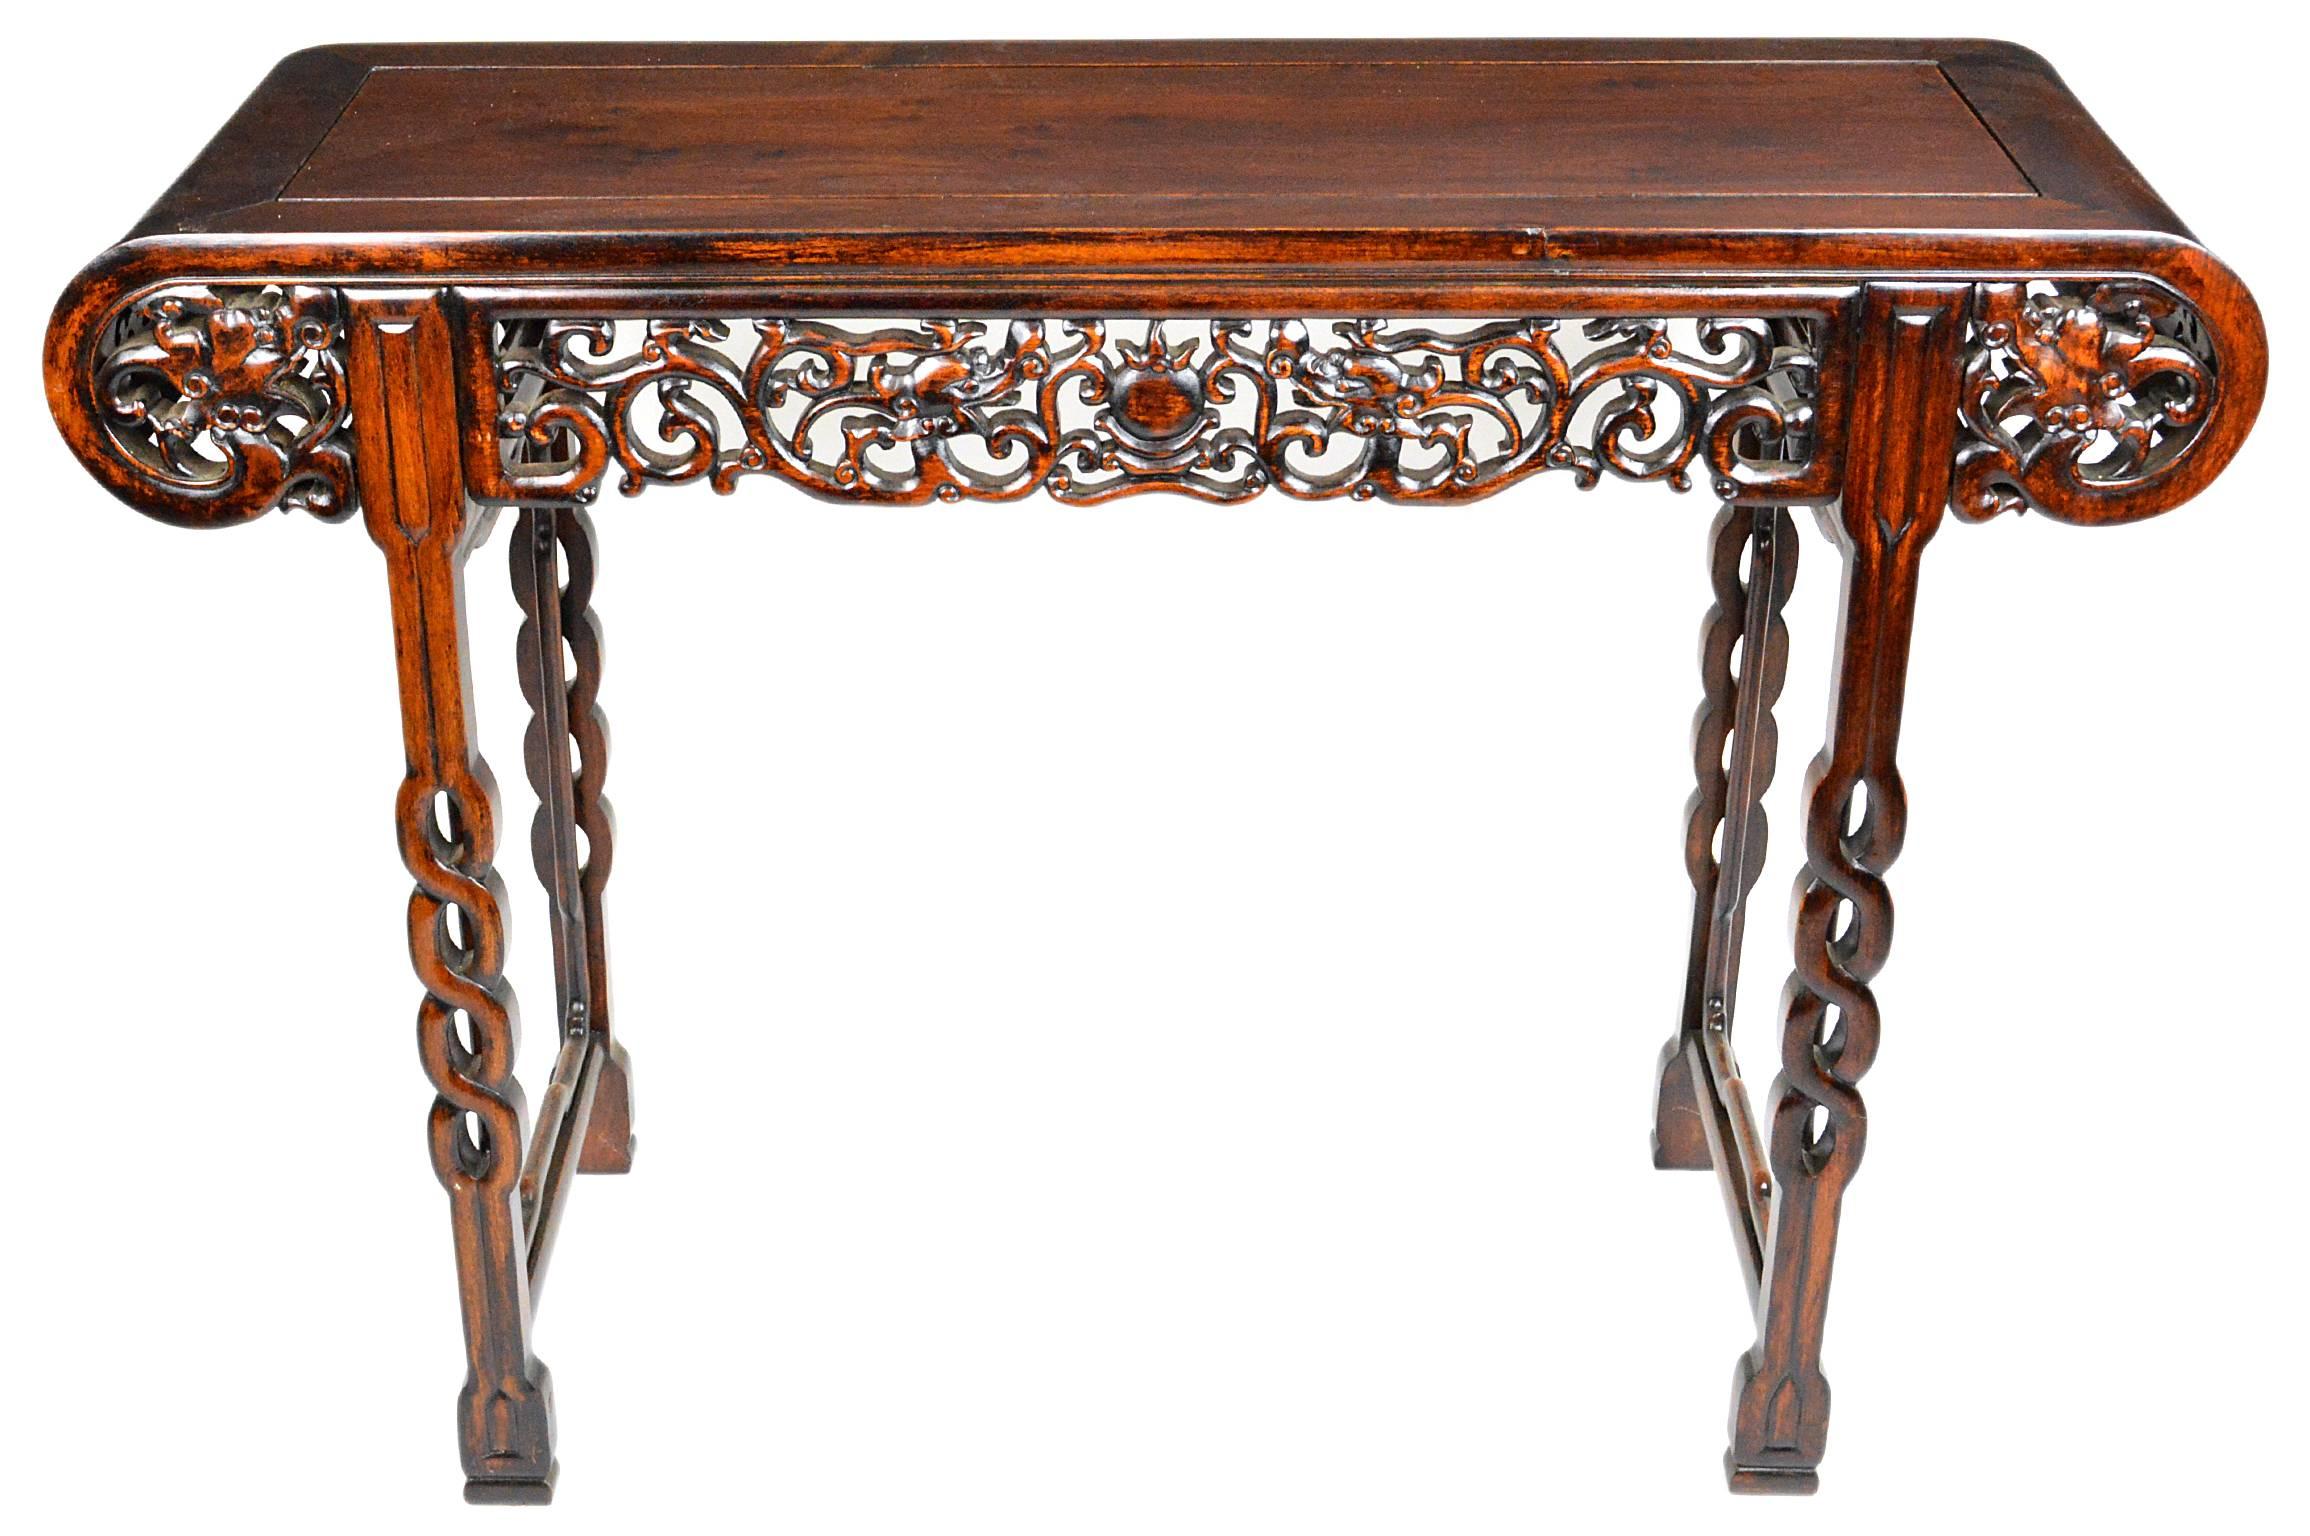 Rosewood Chinese hand-carved altar table or console table having intricate Folk Art carving works on all sides and open carved infinity legs.